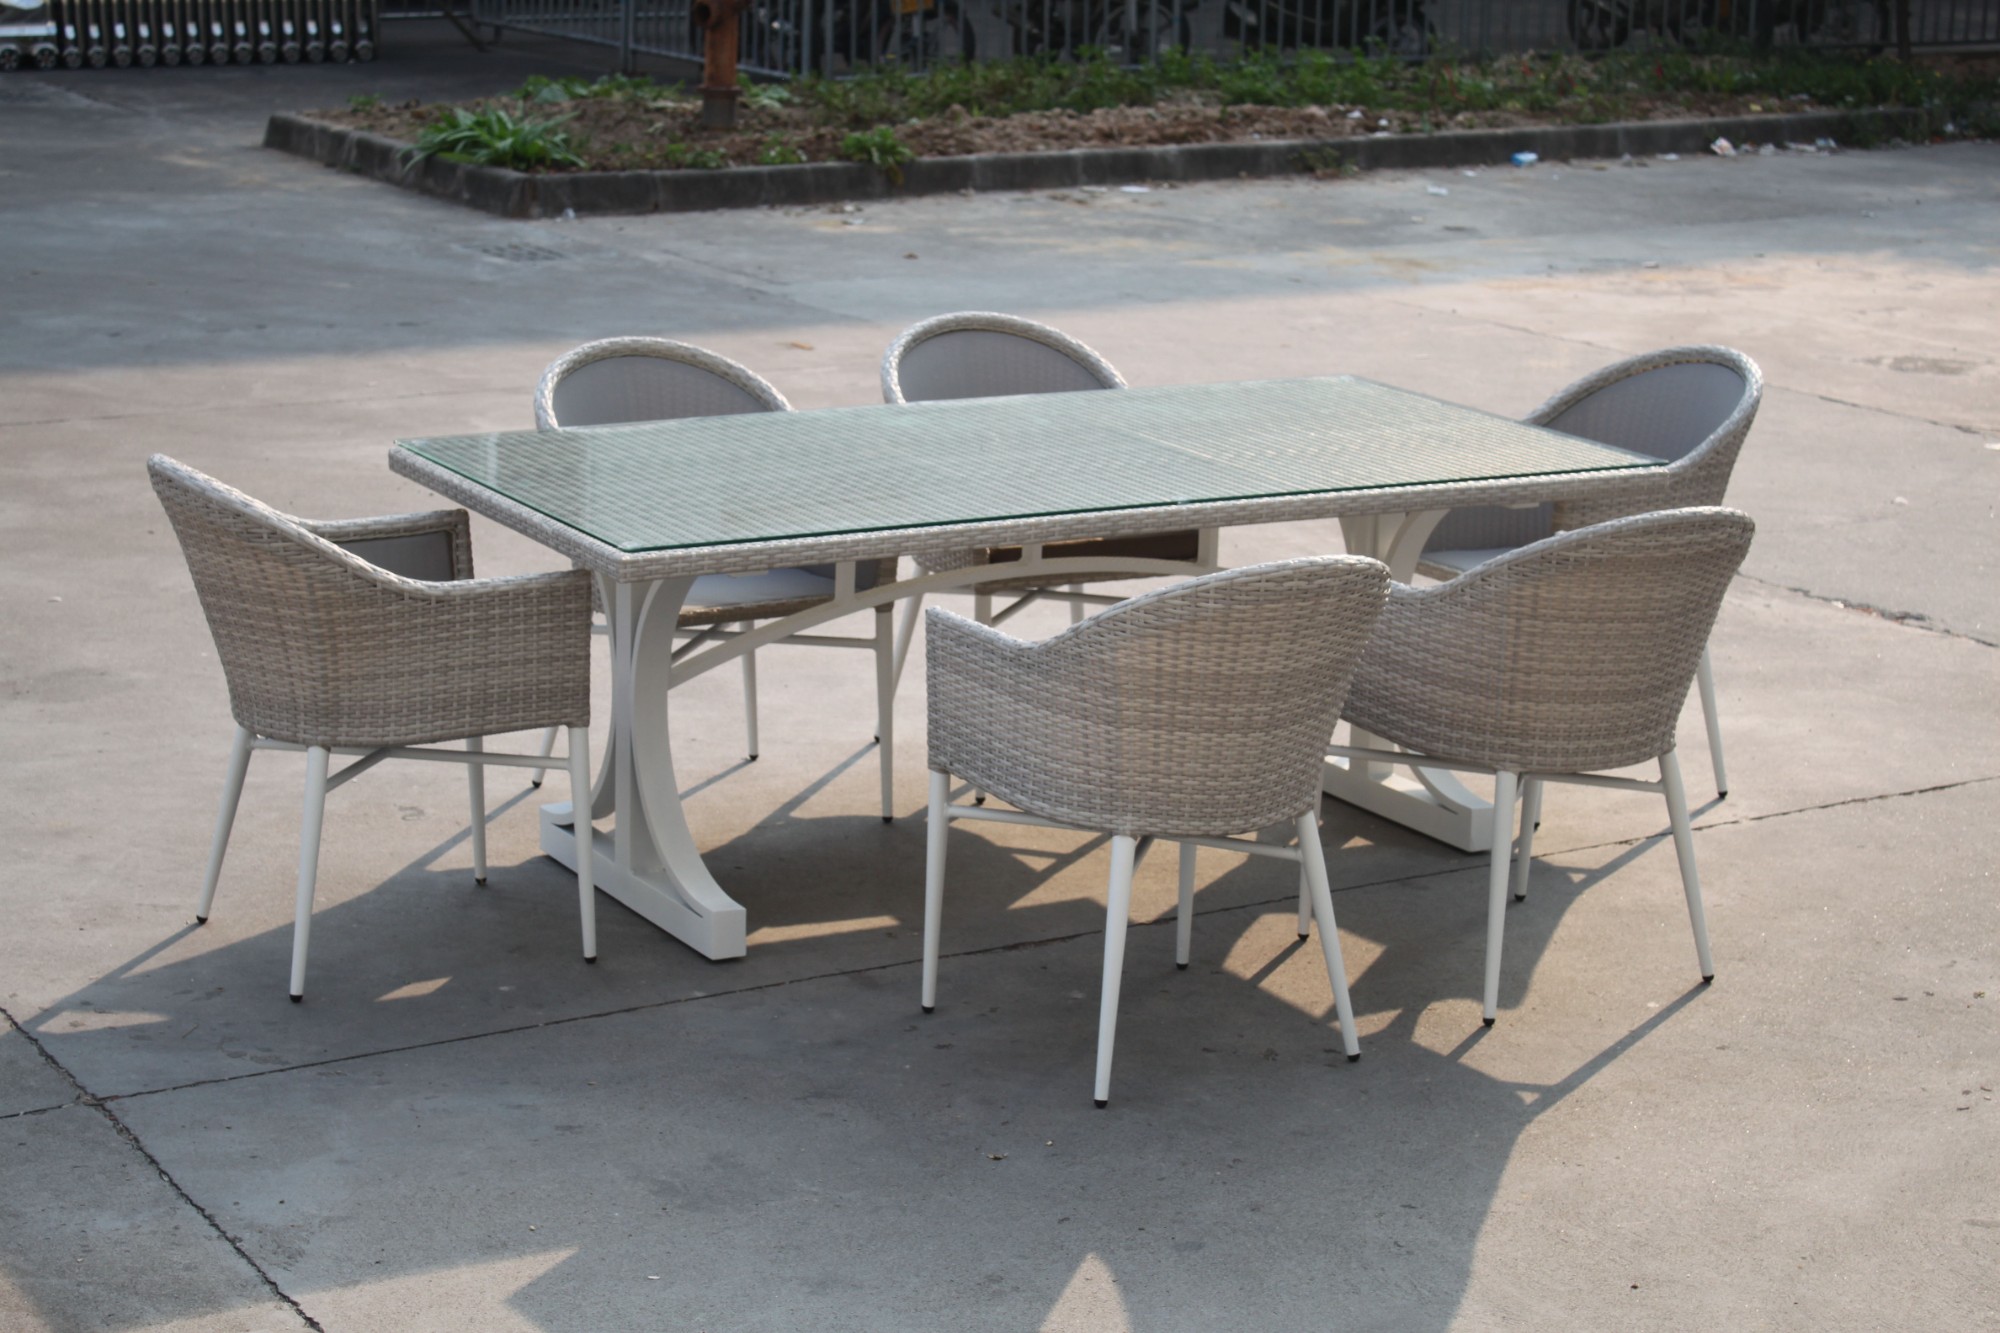 Outdoor Dining Table Set Supplier Manufacturers, Outdoor Dining Table Set Supplier Factory, Supply Outdoor Dining Table Set Supplier